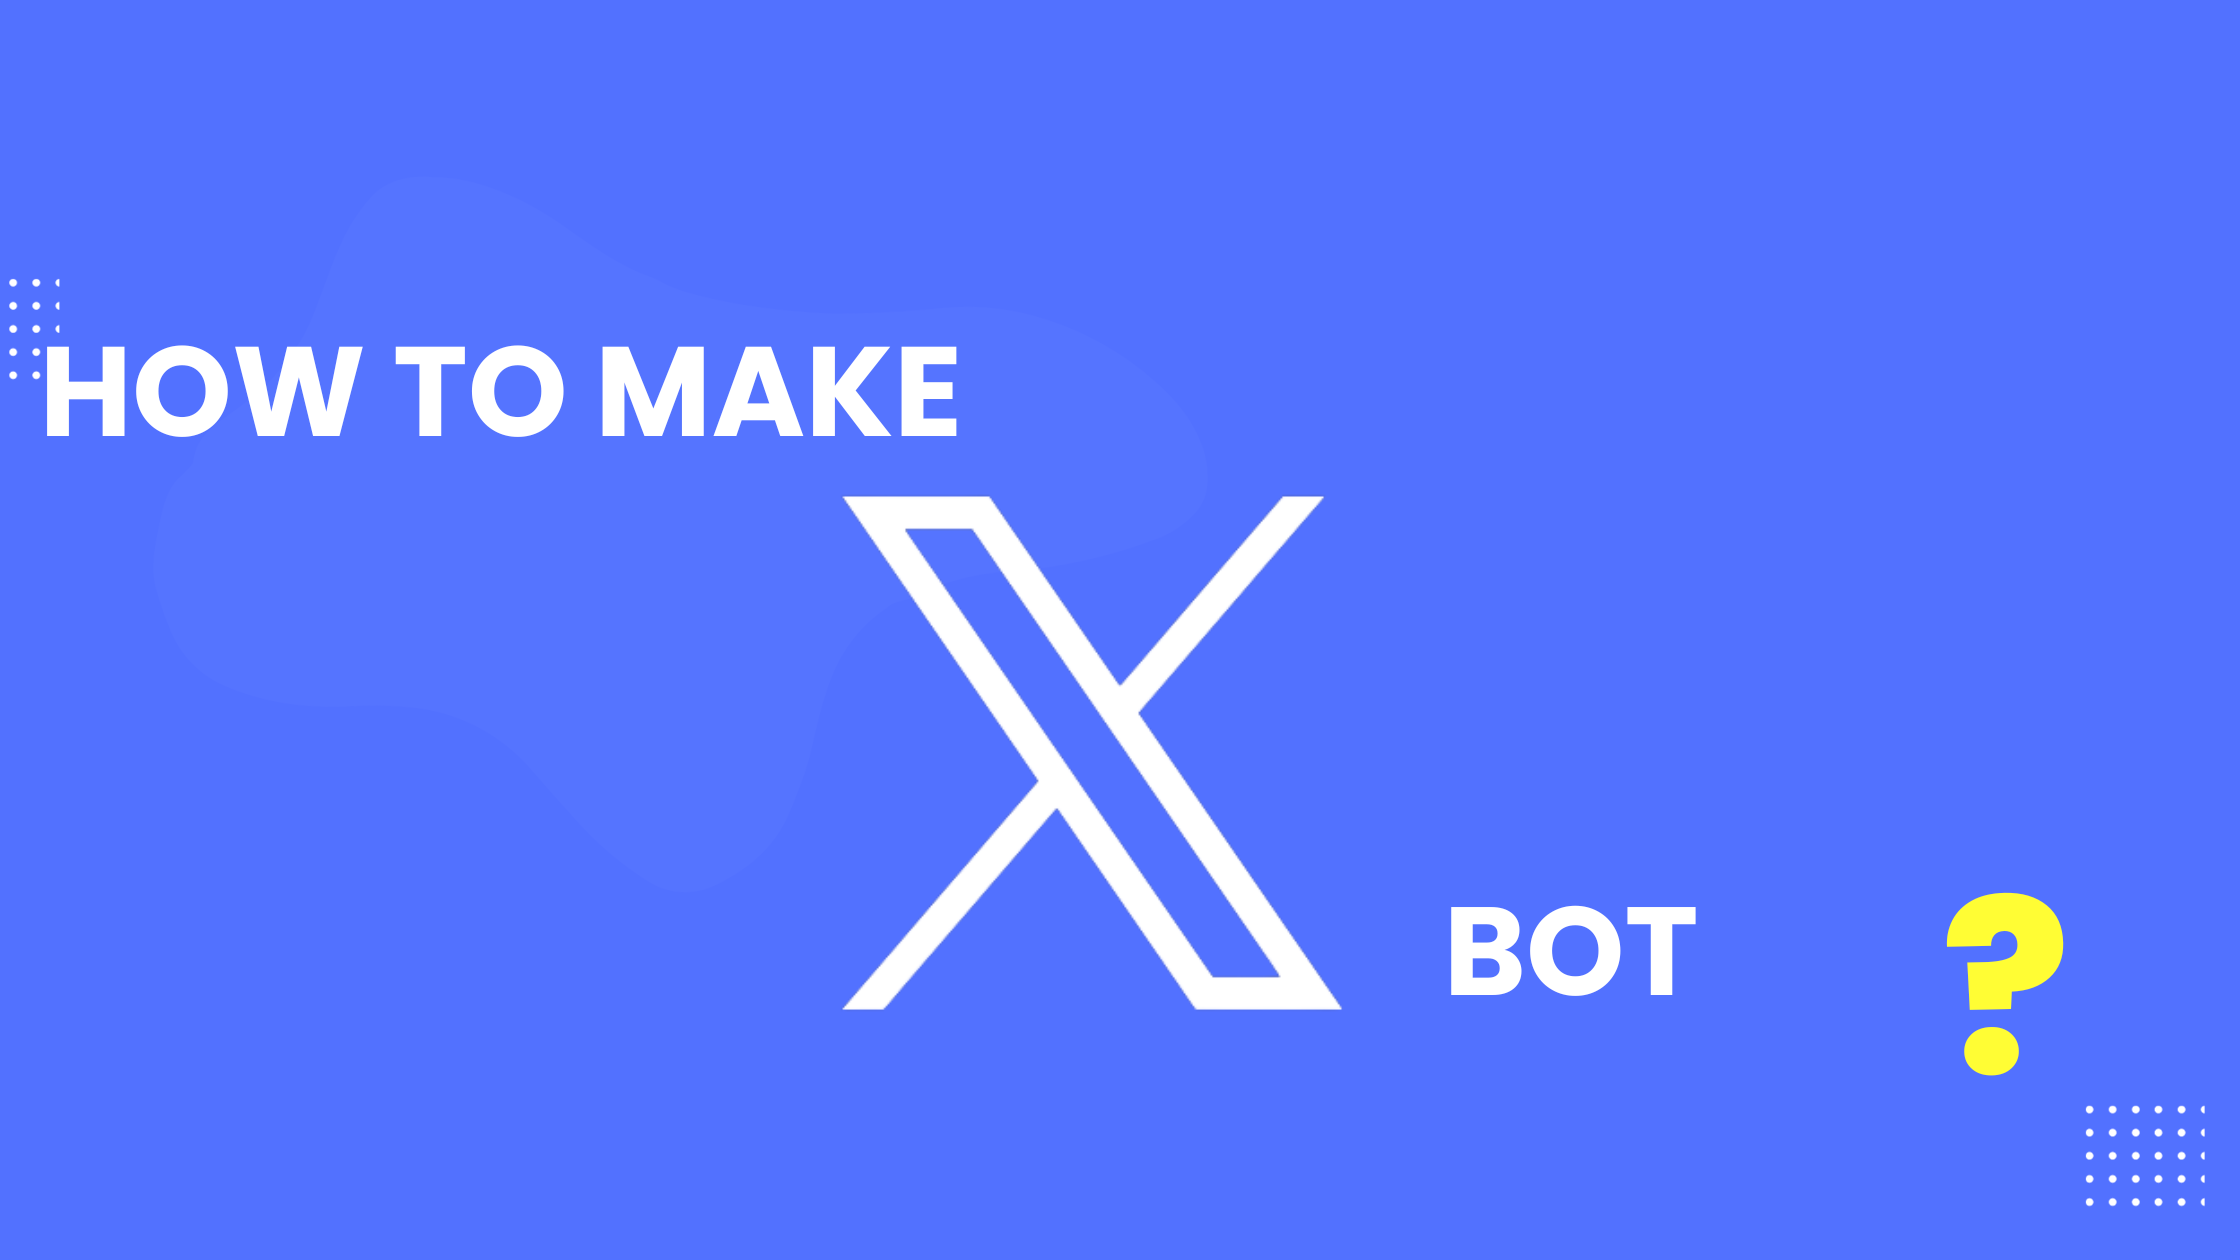 How to Make a Bot